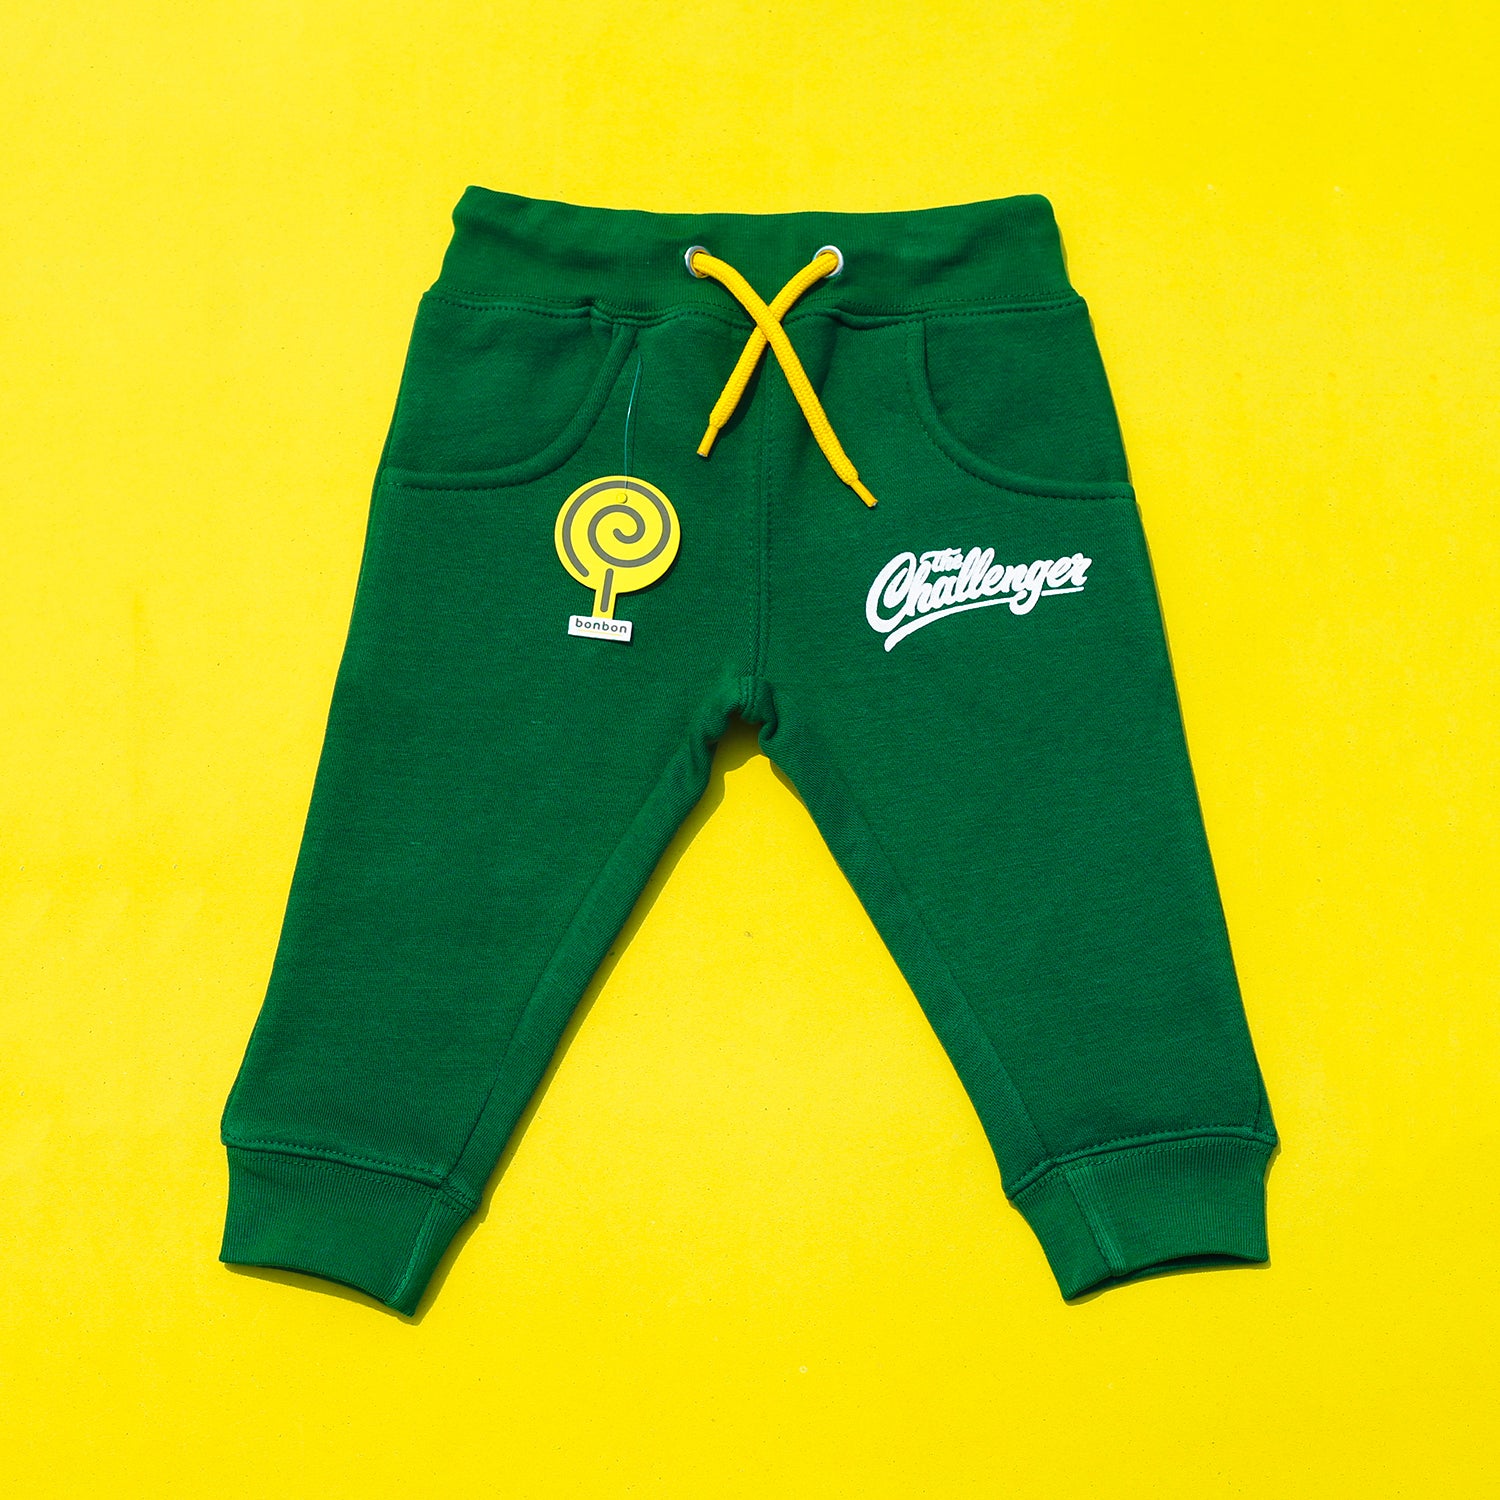 The Challenger Green Tracksuit